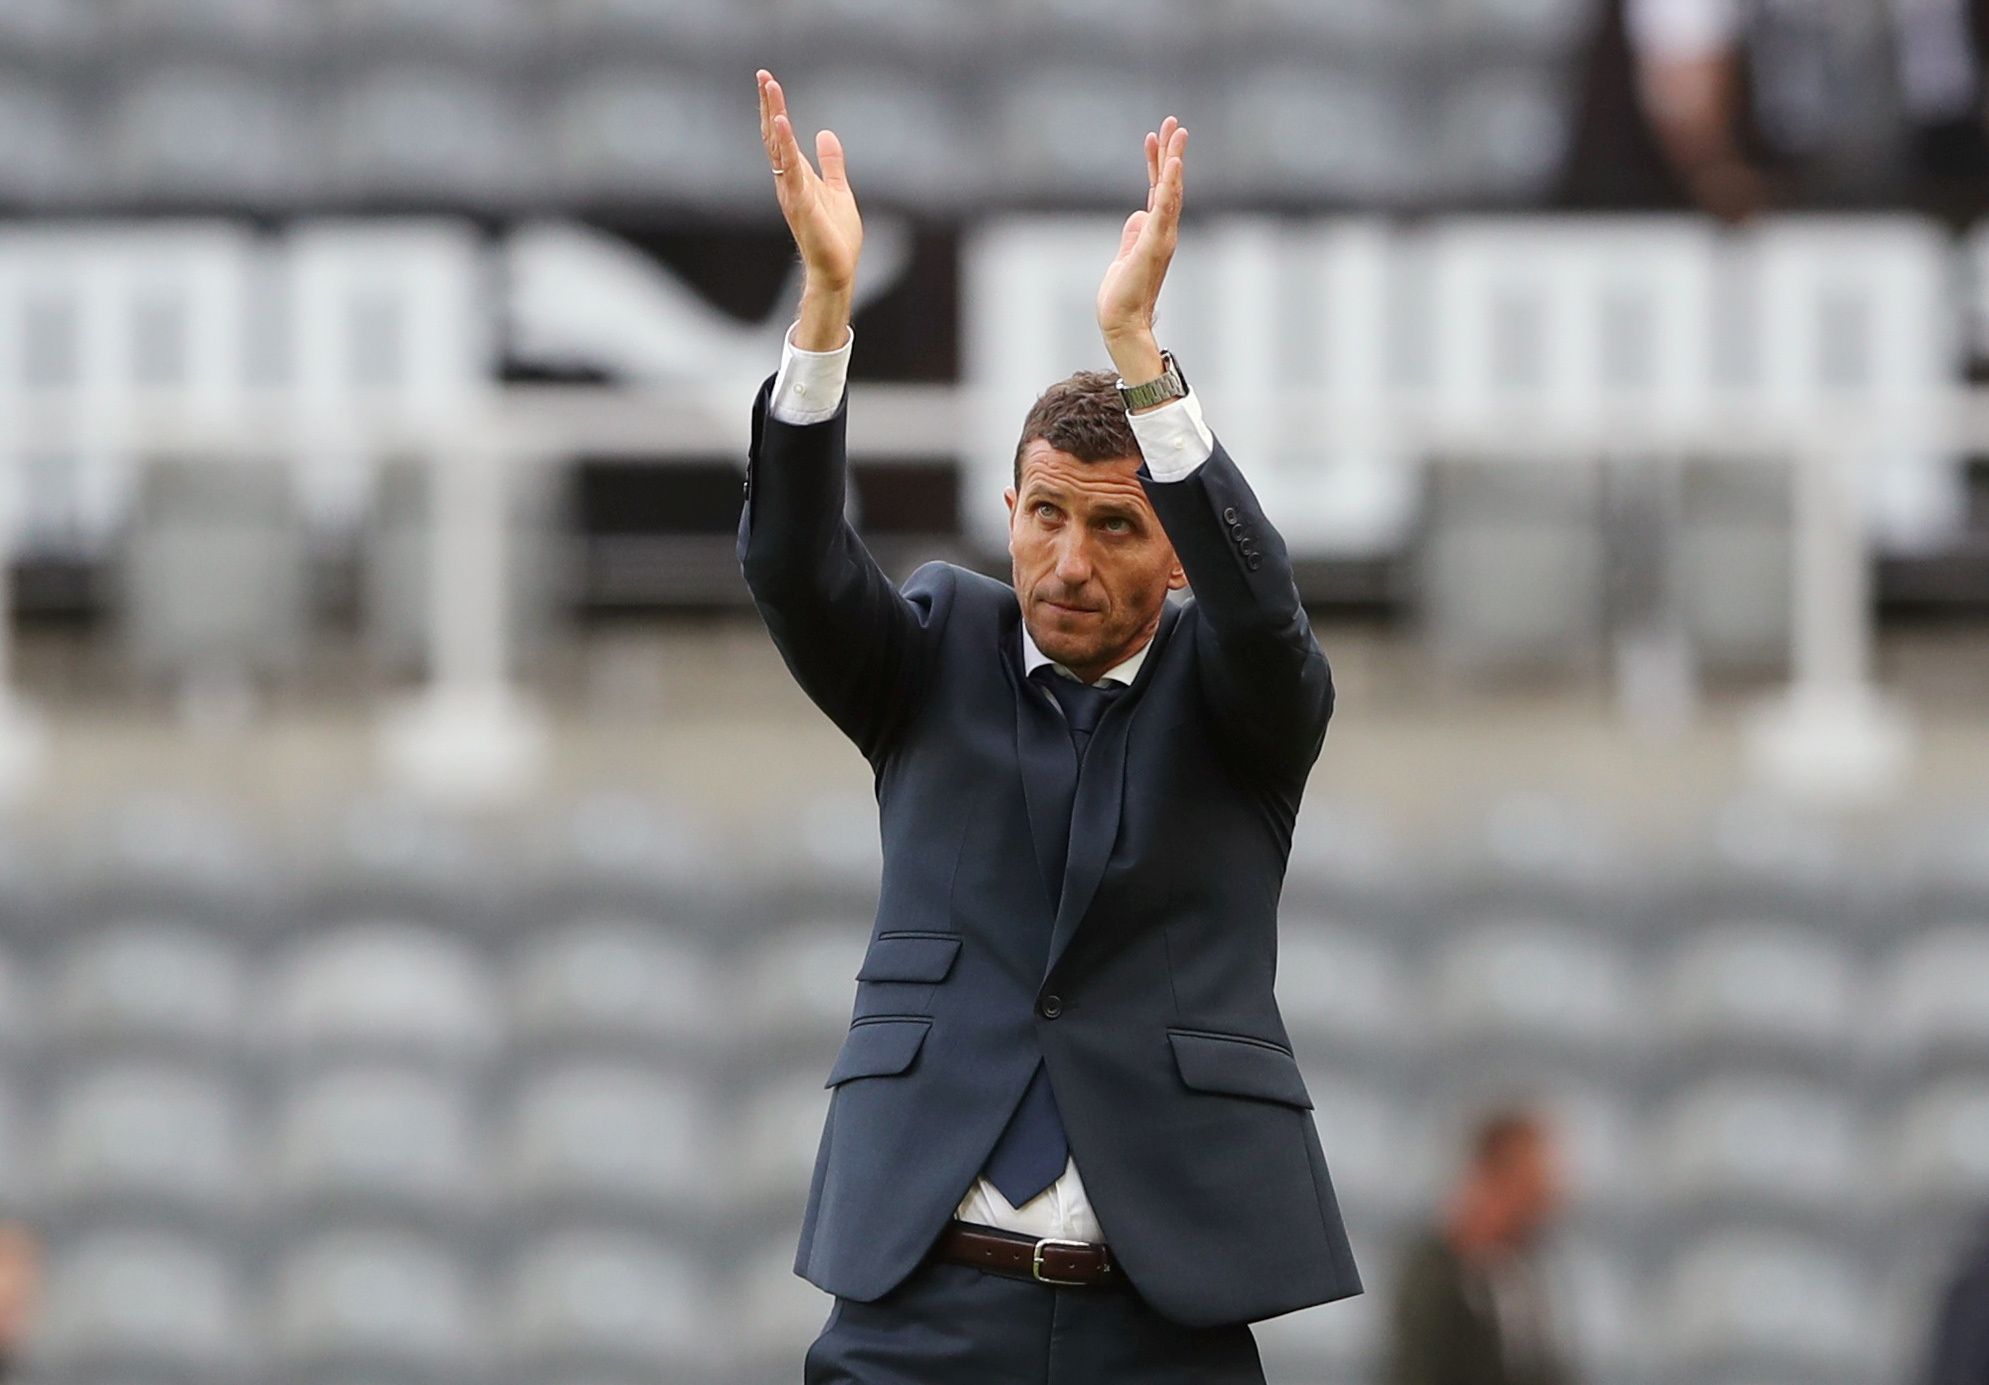 Soccer Football - Premier League - Newcastle United v Watford - St James' Park, Newcastle, Britain - August 31, 2019  Watford manager Javi Gracia after the match   REUTERS/Scott Heppell  EDITORIAL USE ONLY. No use with unauthorized audio, video, data, fixture lists, club/league logos or 